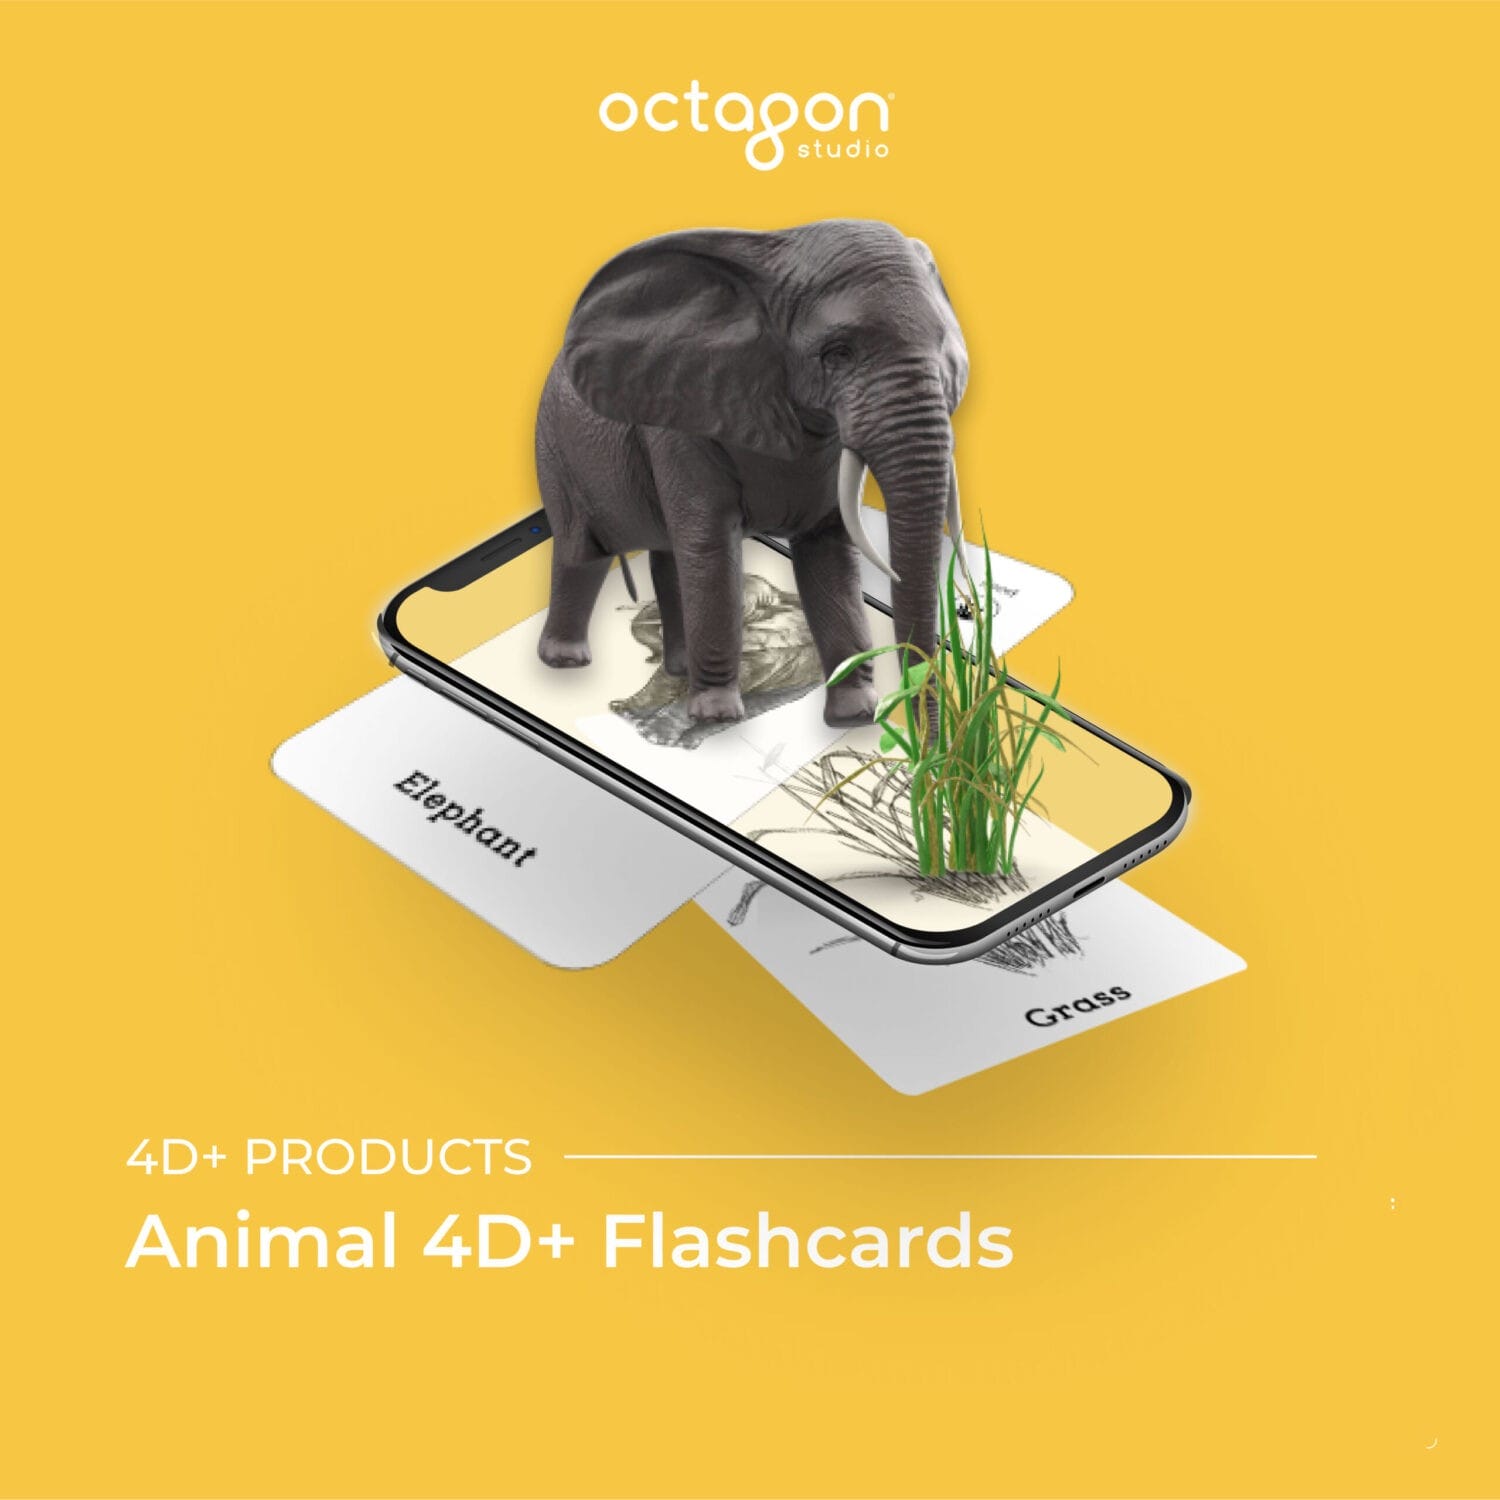 Animal flash cards with augmented reality (AR) feature